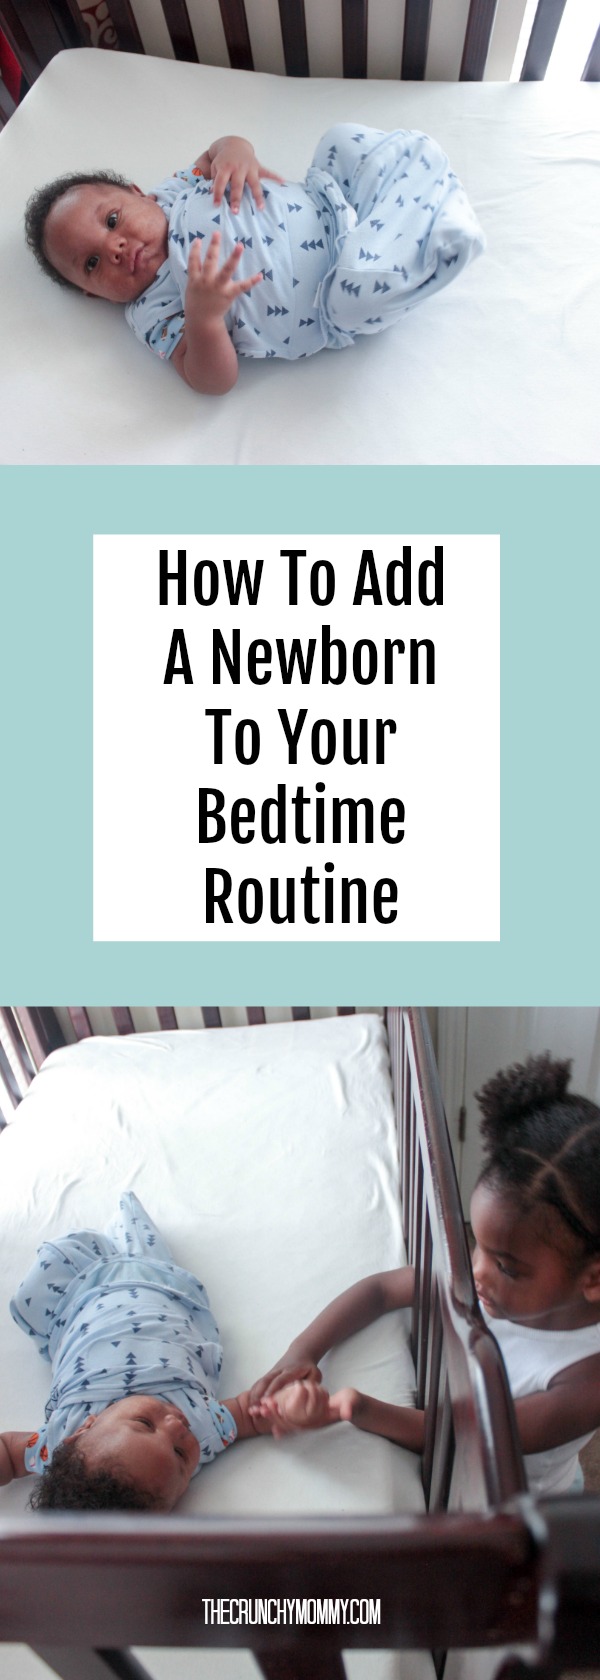 A solid bedtime routine is truly priceless. Here's how we're incorporating our newest addition to the family into my FAVORITE routine!